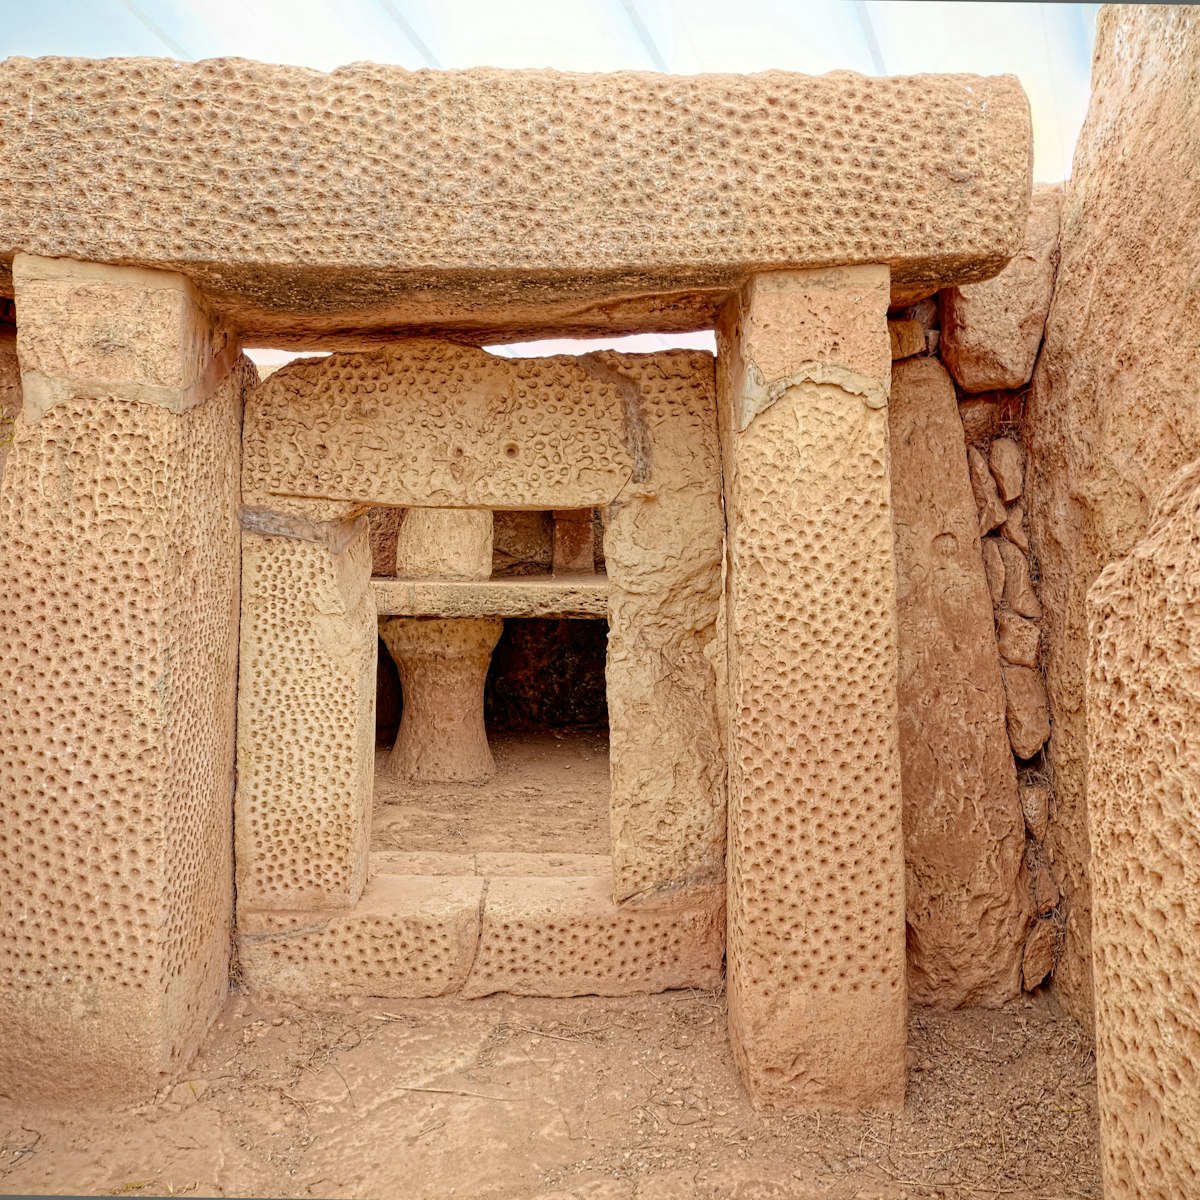 Details of Mnajdra megalithic temples of Malta (Qrendi)
